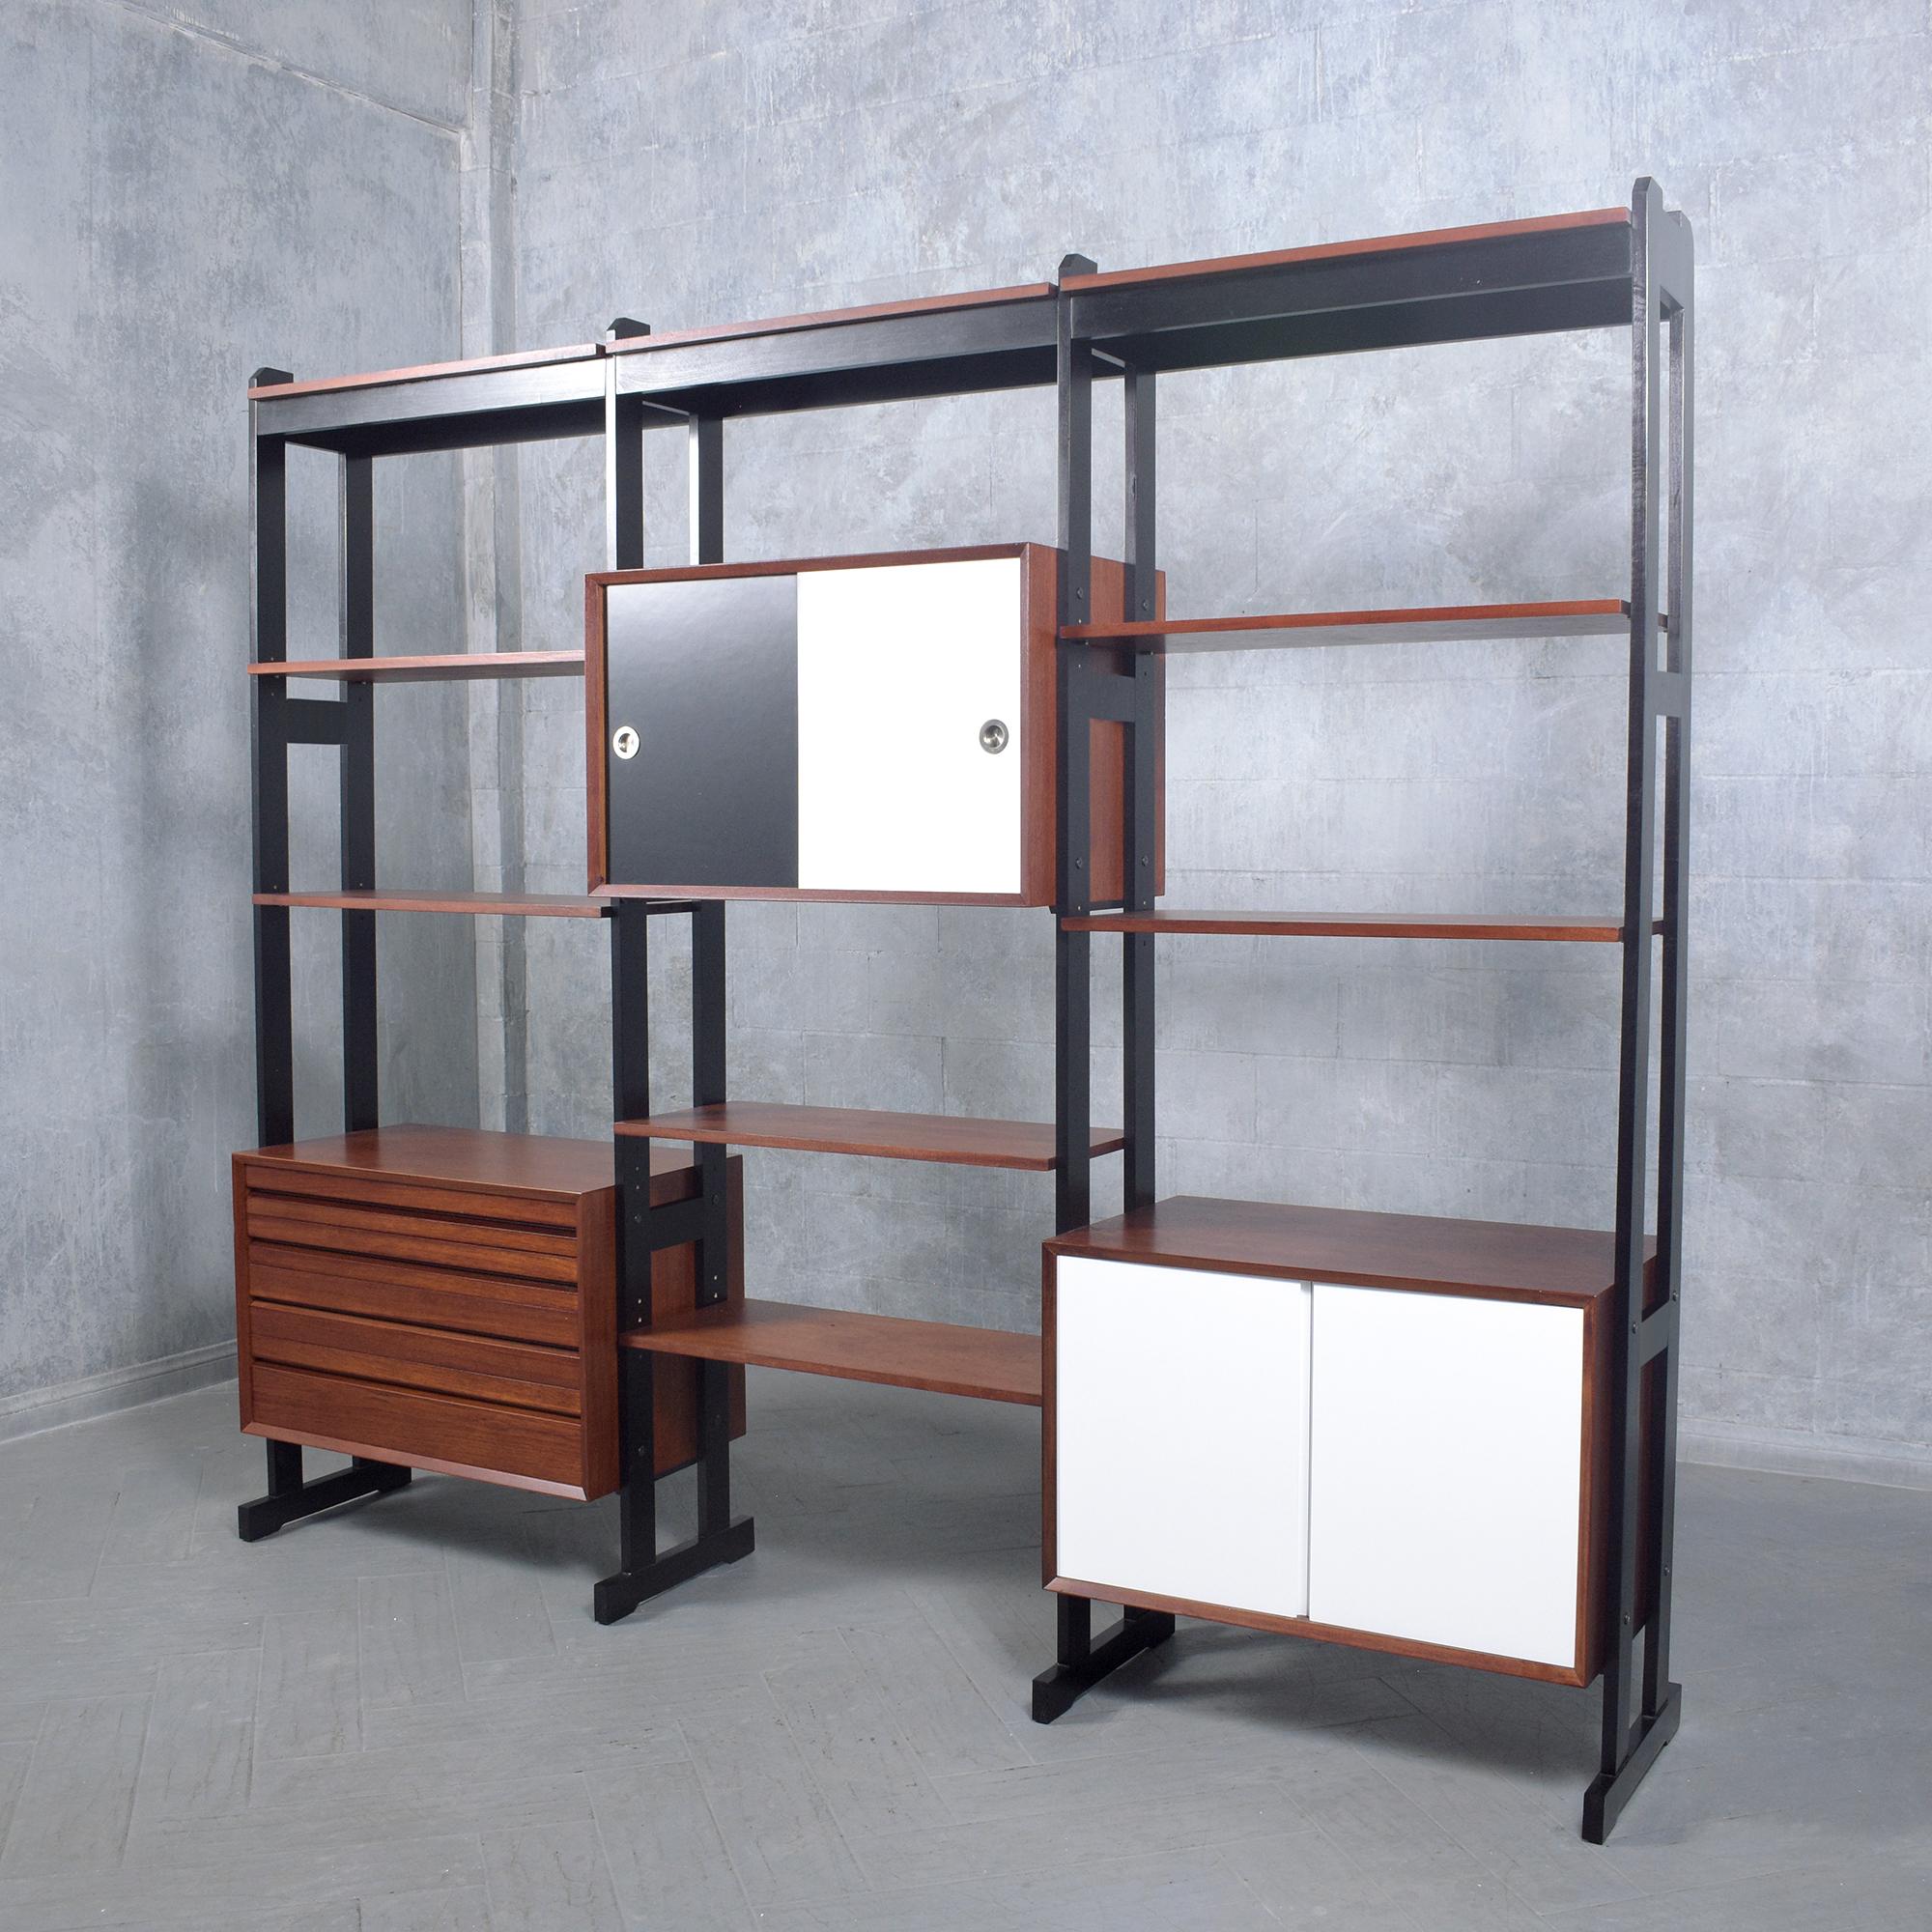 Step back into the stylish 1960s with our mid-century modern freestanding wall unit, a masterpiece of design and craftsmanship. Hand-crafted from high-quality teak, this piece has been expertly restored and refinished by our team of professional